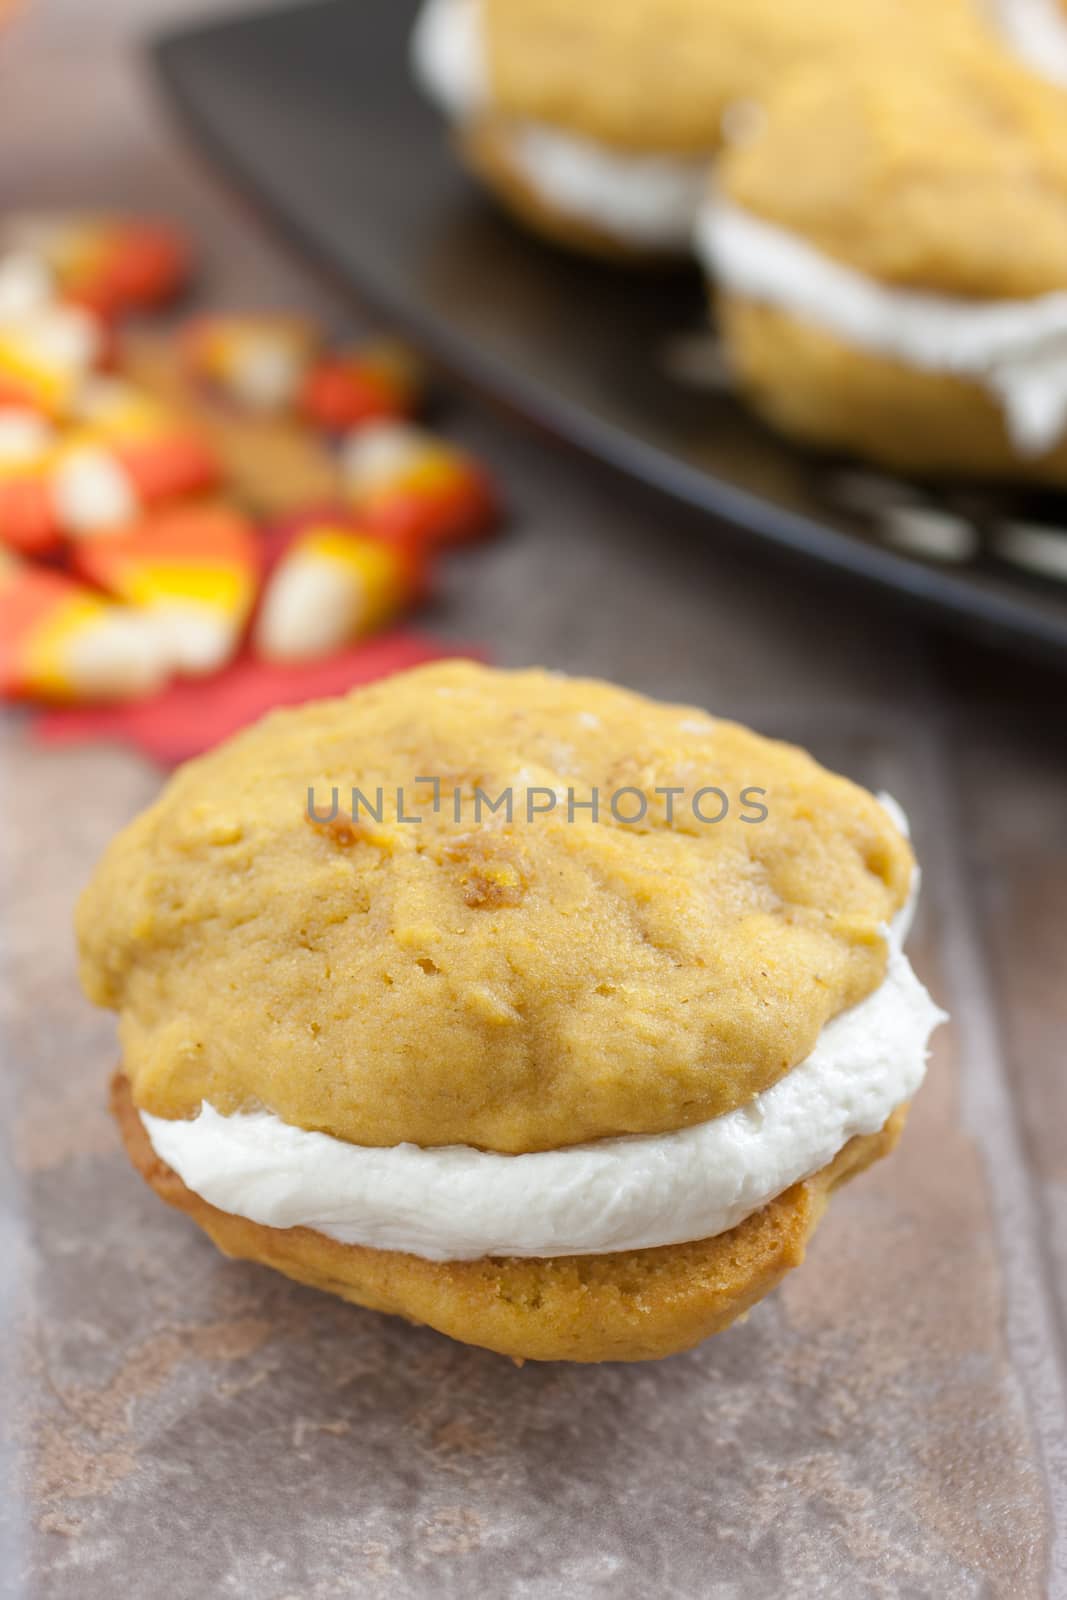 Pumpkin flavored whoopie pie cakes with whipped vanilla cream filling.